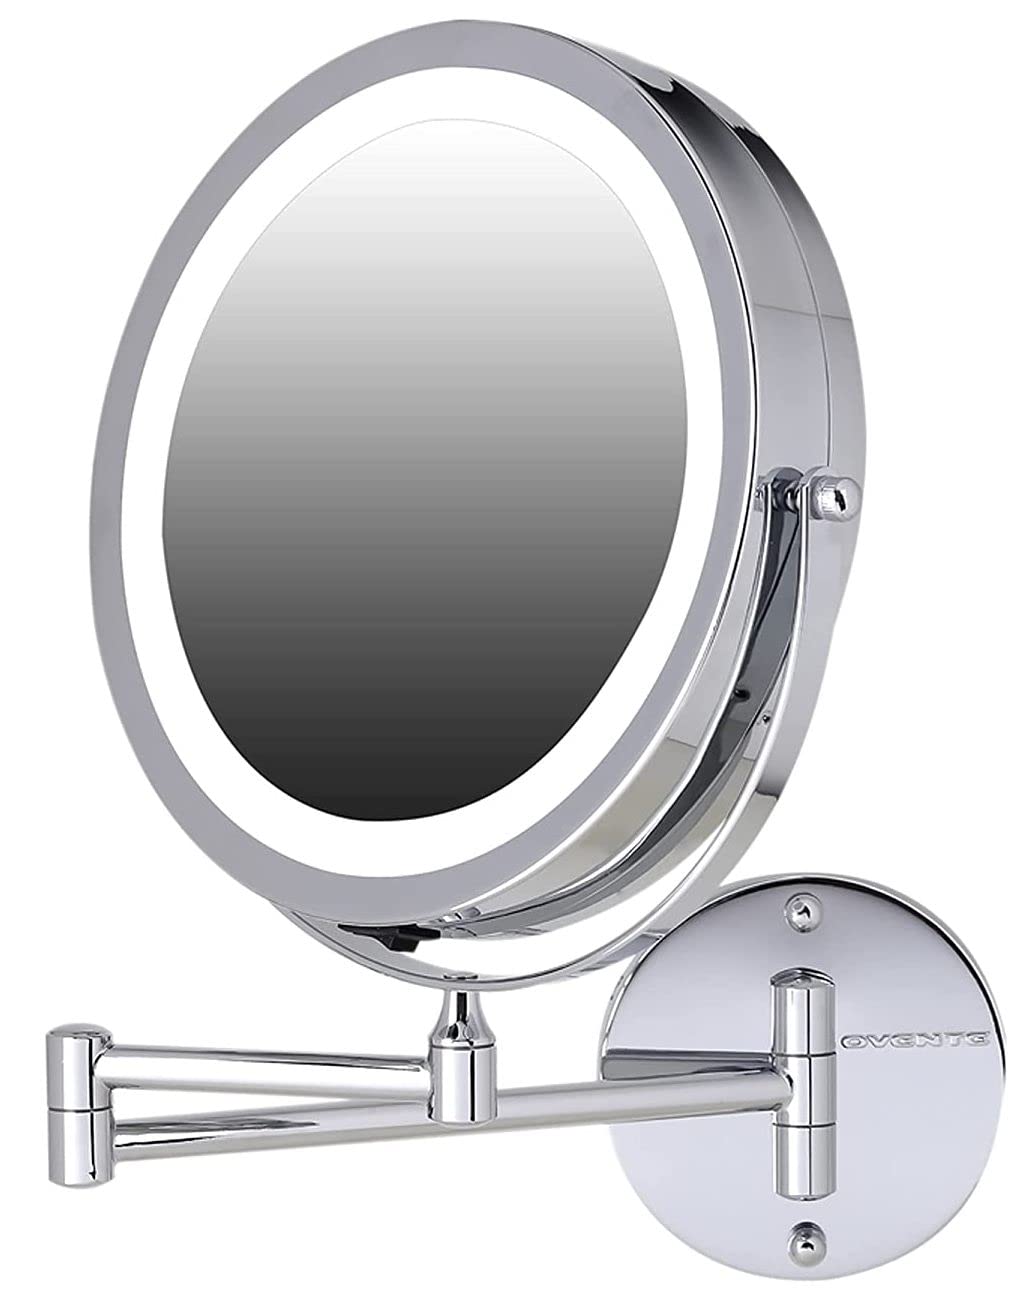 Ovente 7" Lighted Wall Mount Makeup Mirror w/ 1X & 7X Magnifier (Polished Chrome) $9.99 + Free S&H w/ Prime or orders $25+ ~ Amazon